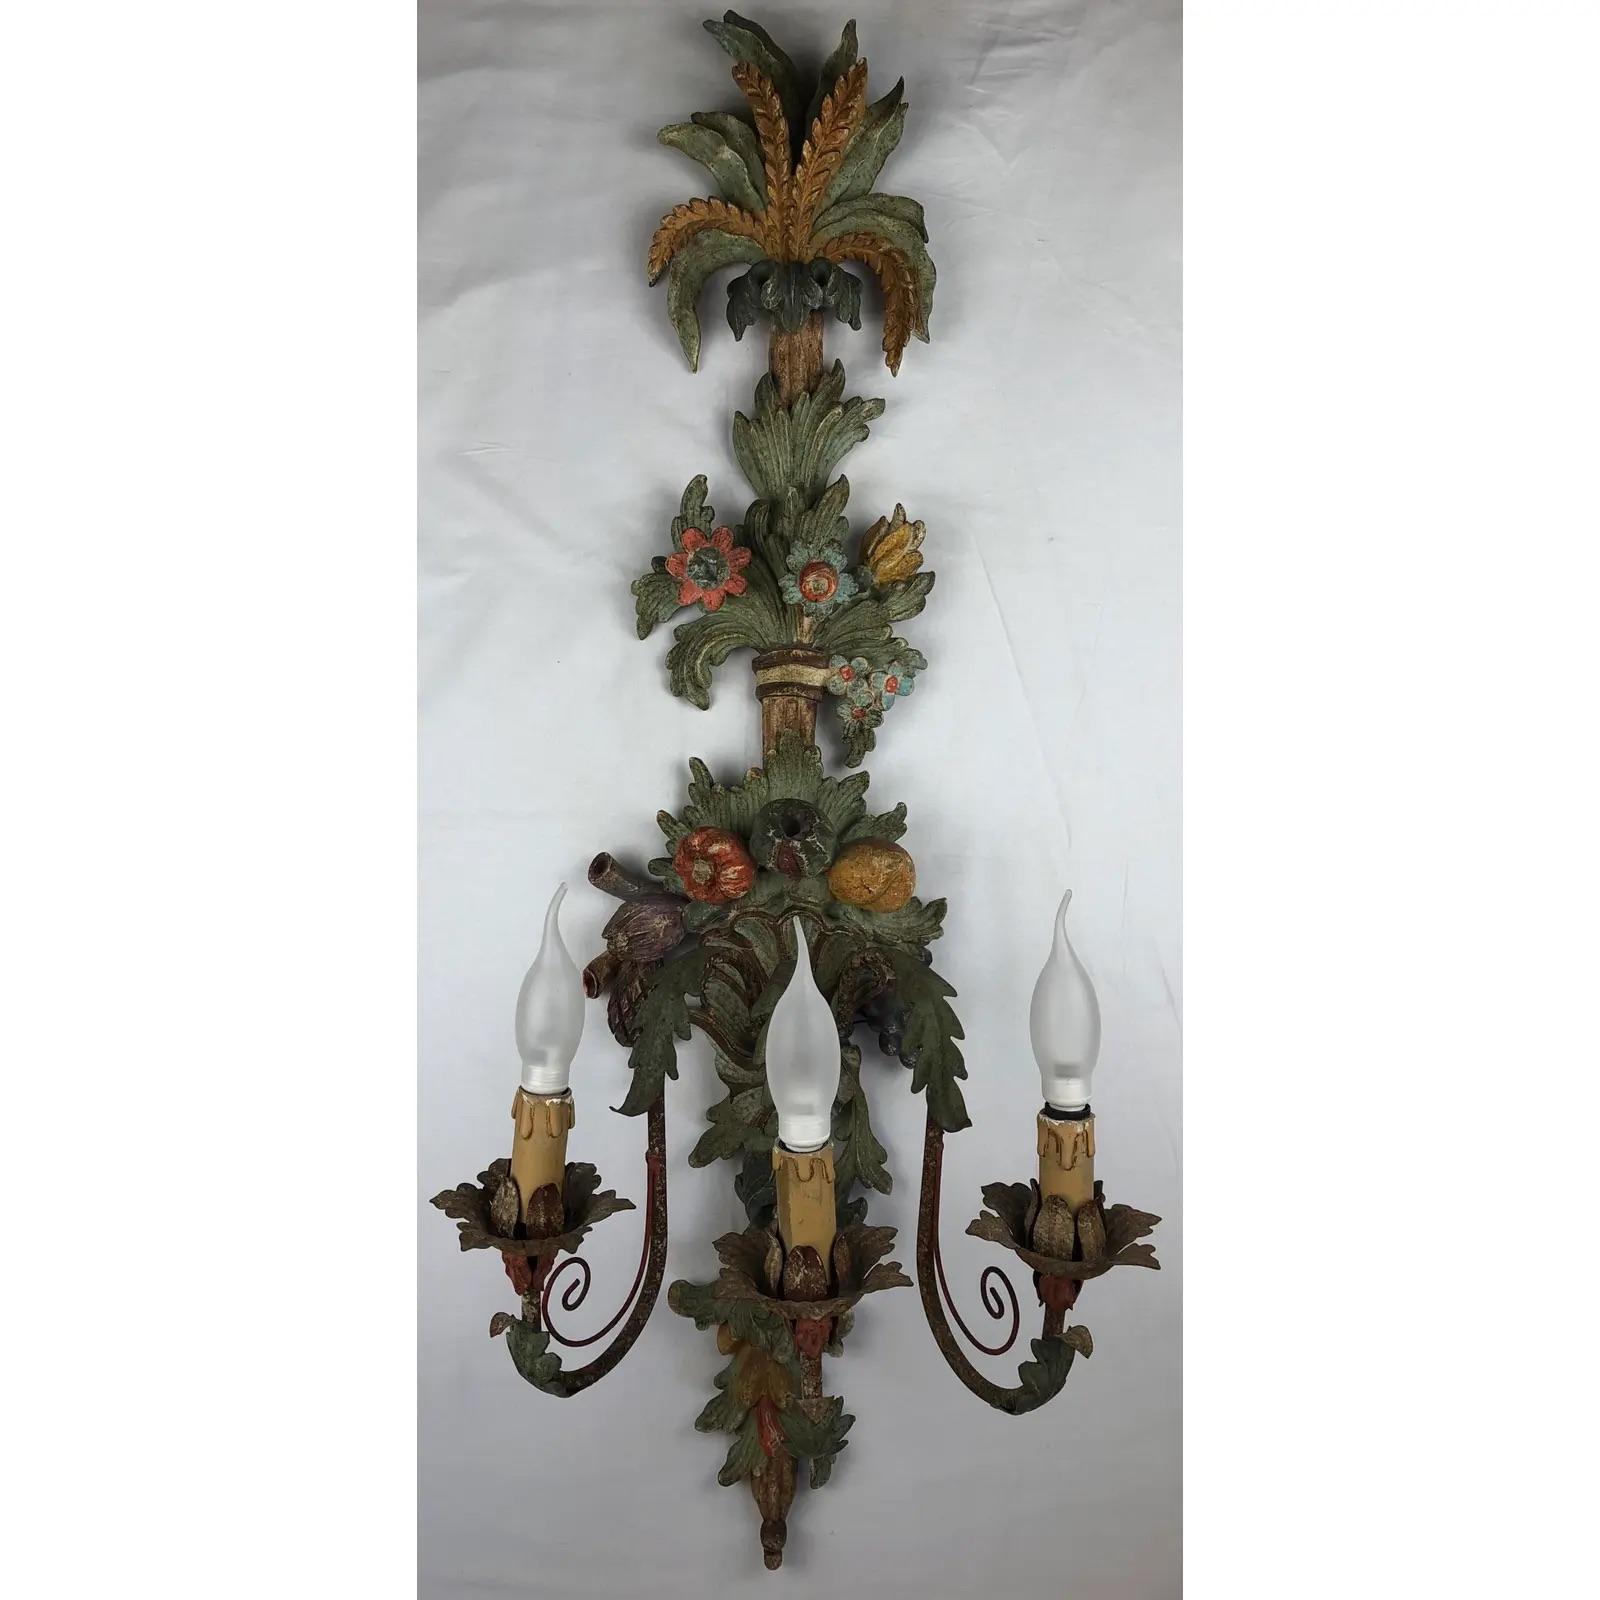 Beautiful sconce, with remarkable floral and foliage designs and details. The wooden sconce is hand carved and probably dates from the 1930s-1940s.

Measures: 39 3/4